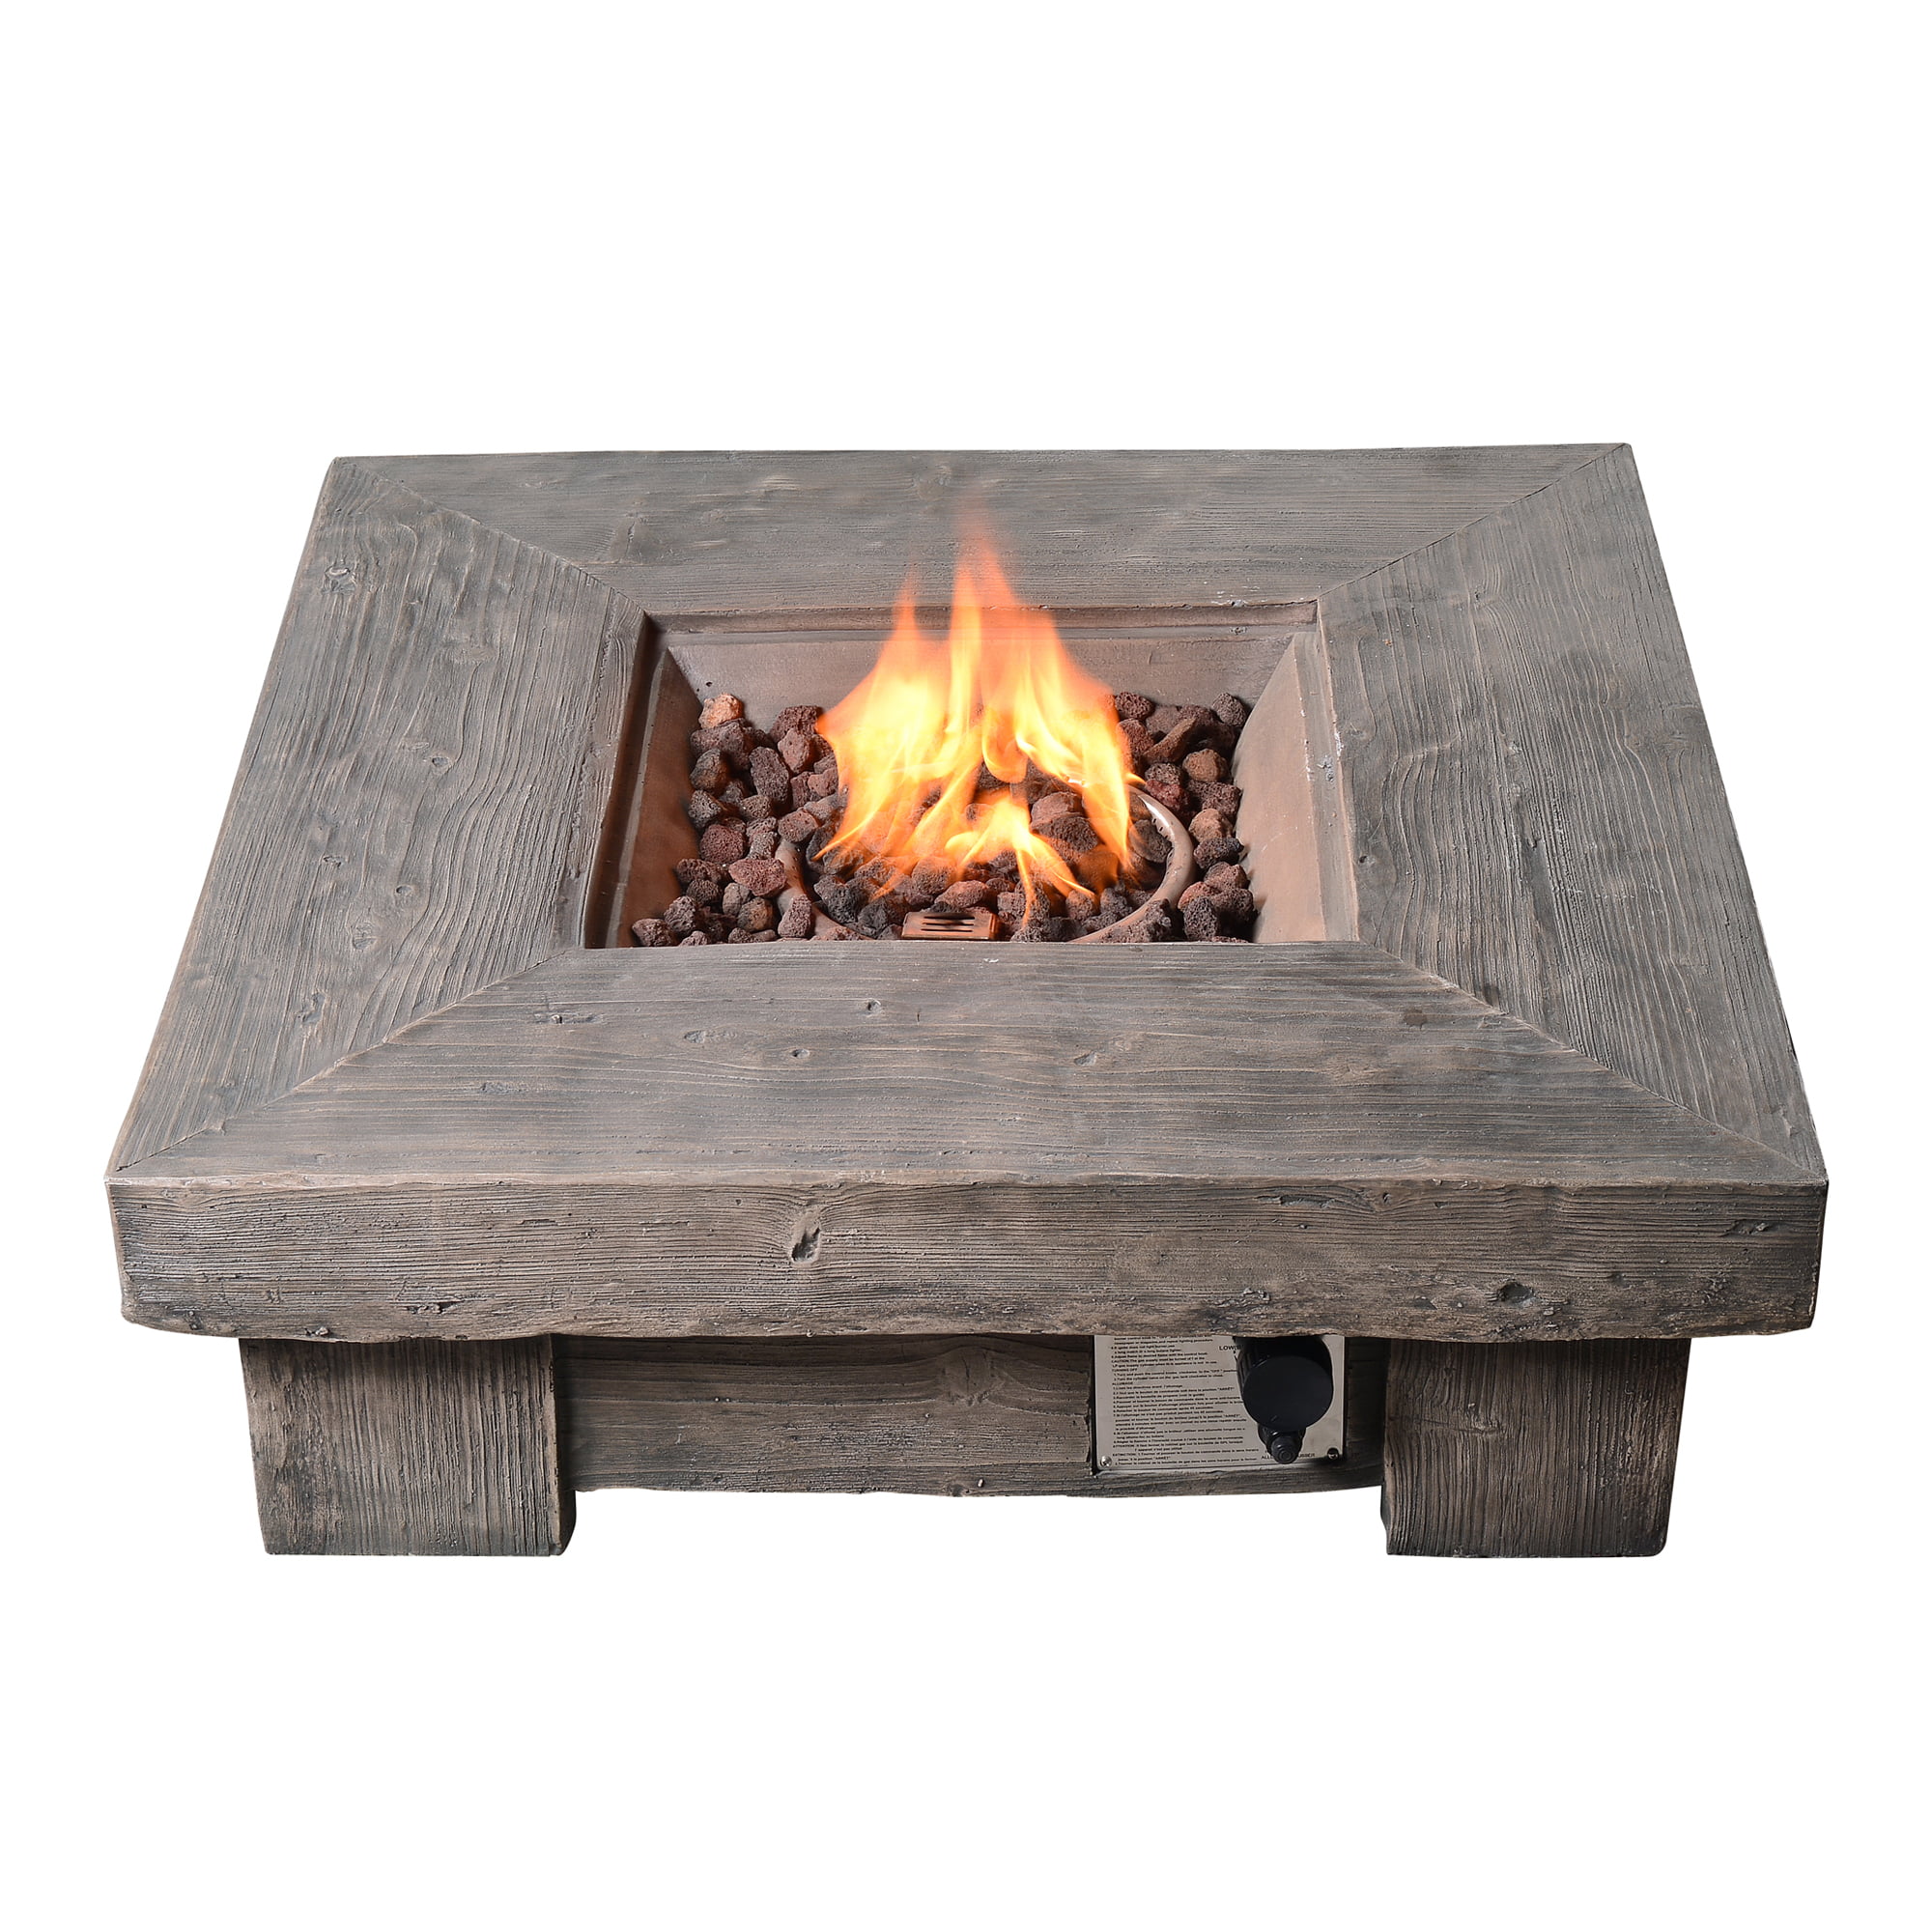 Outdoor Square Ceramic Gas Fire Pit, Wood Gas Fire Pit